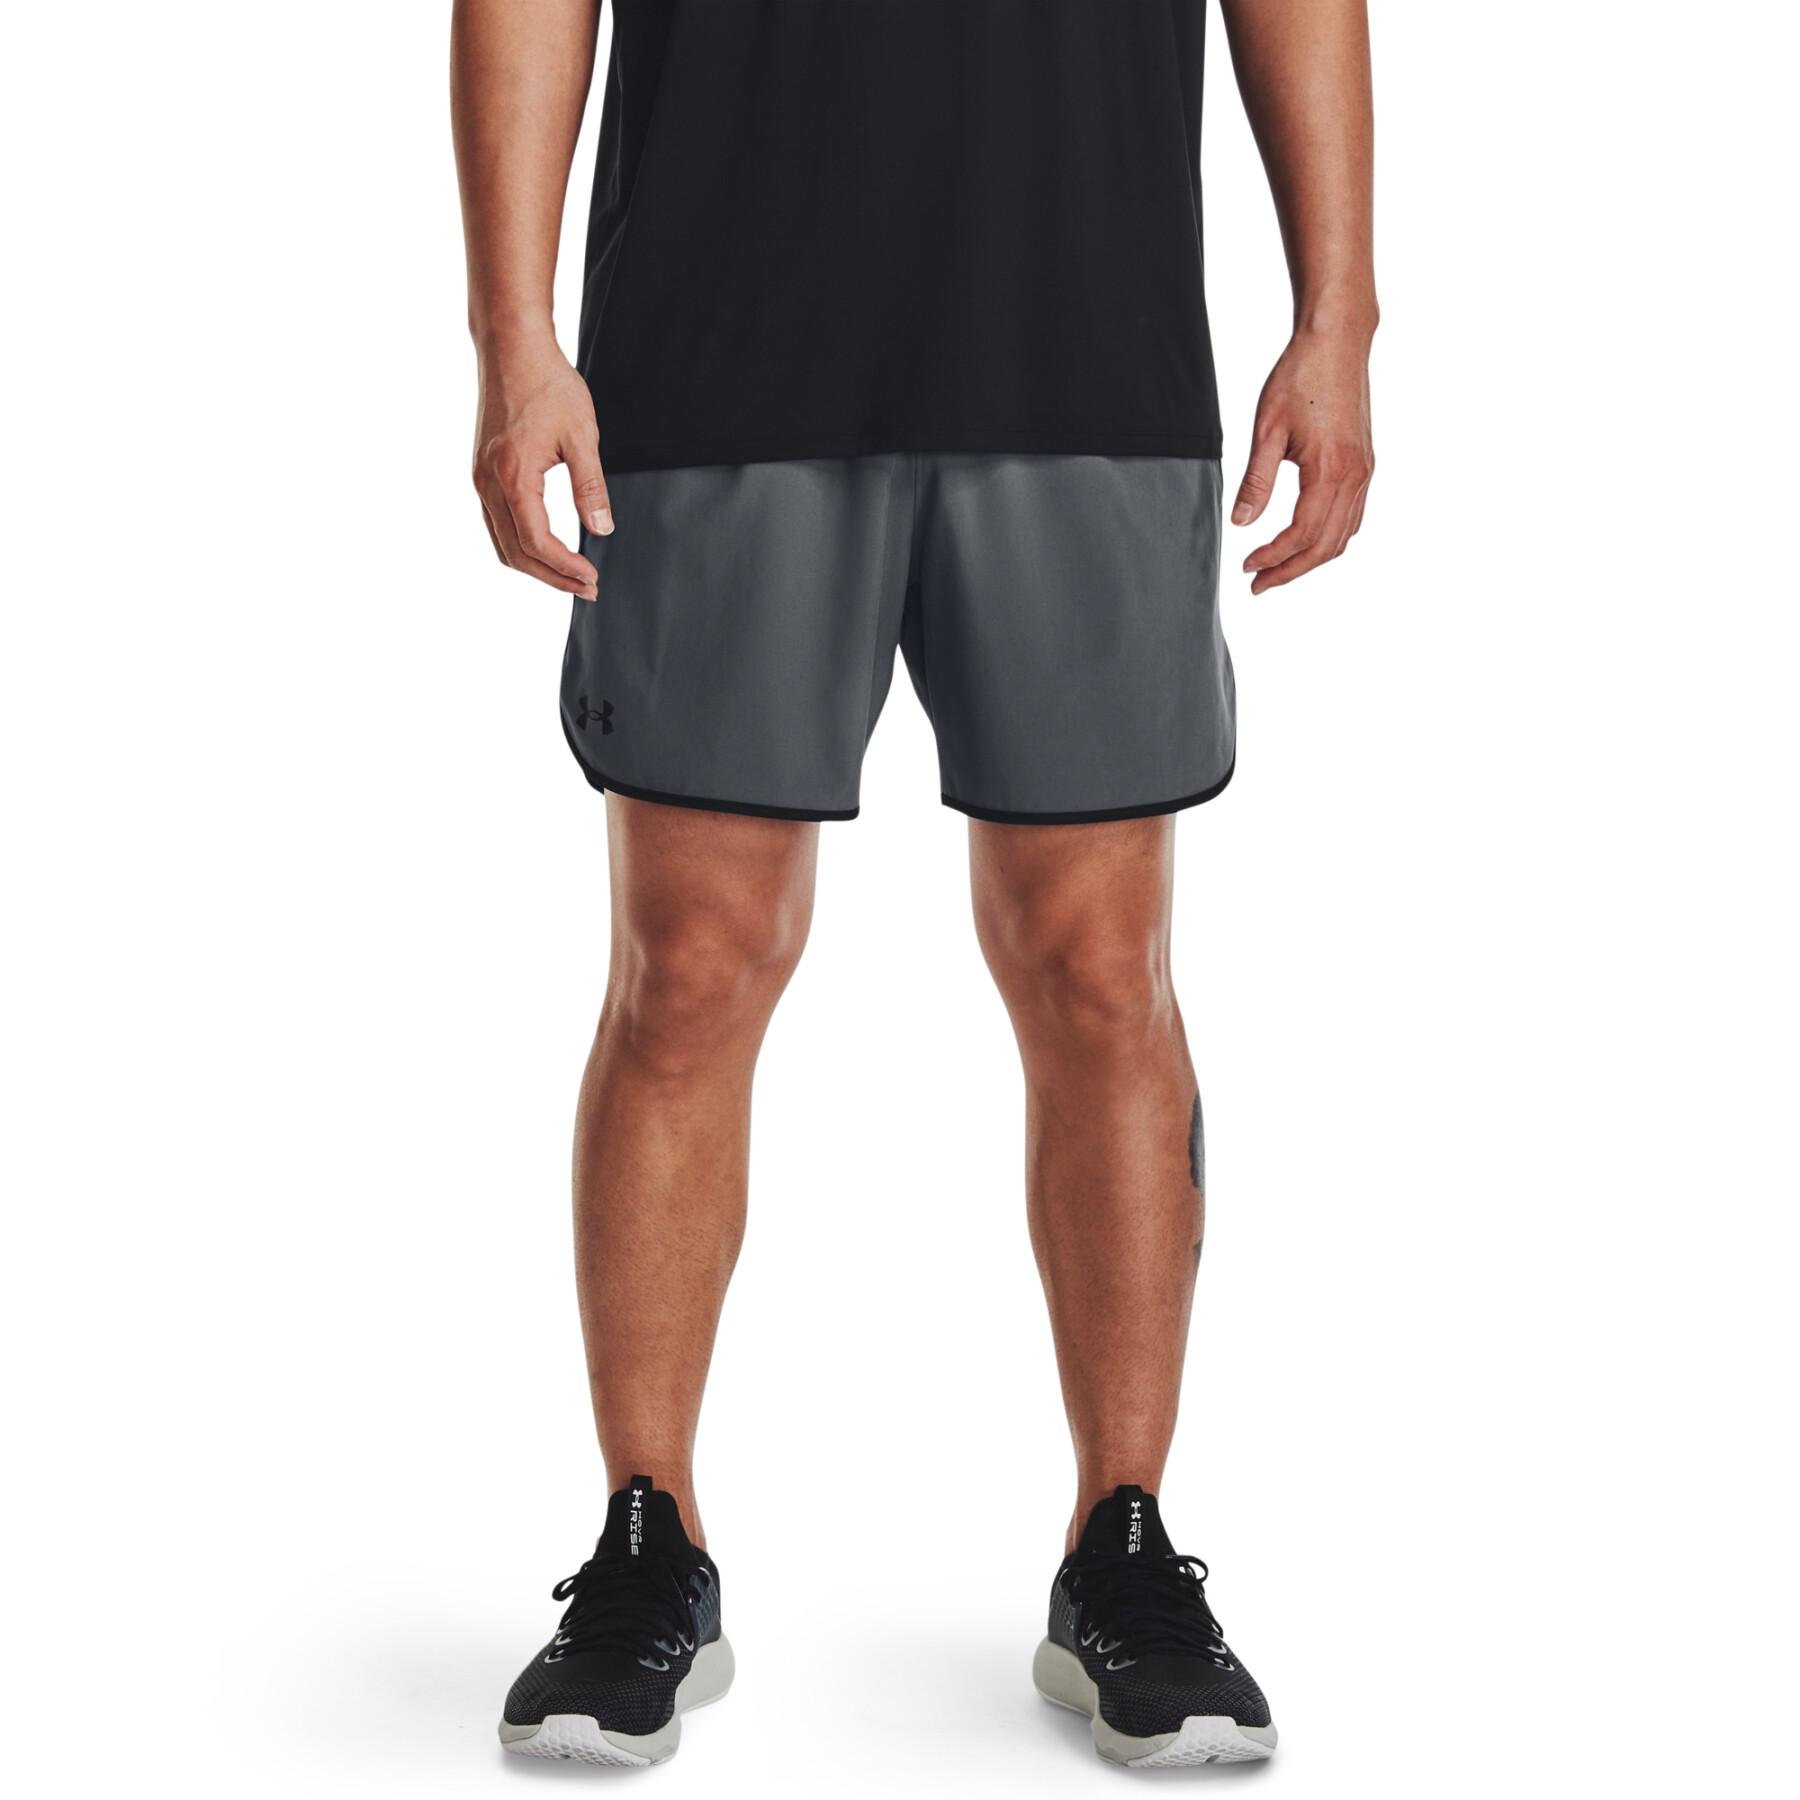 Woven shorts Under Armour HIIT 6"